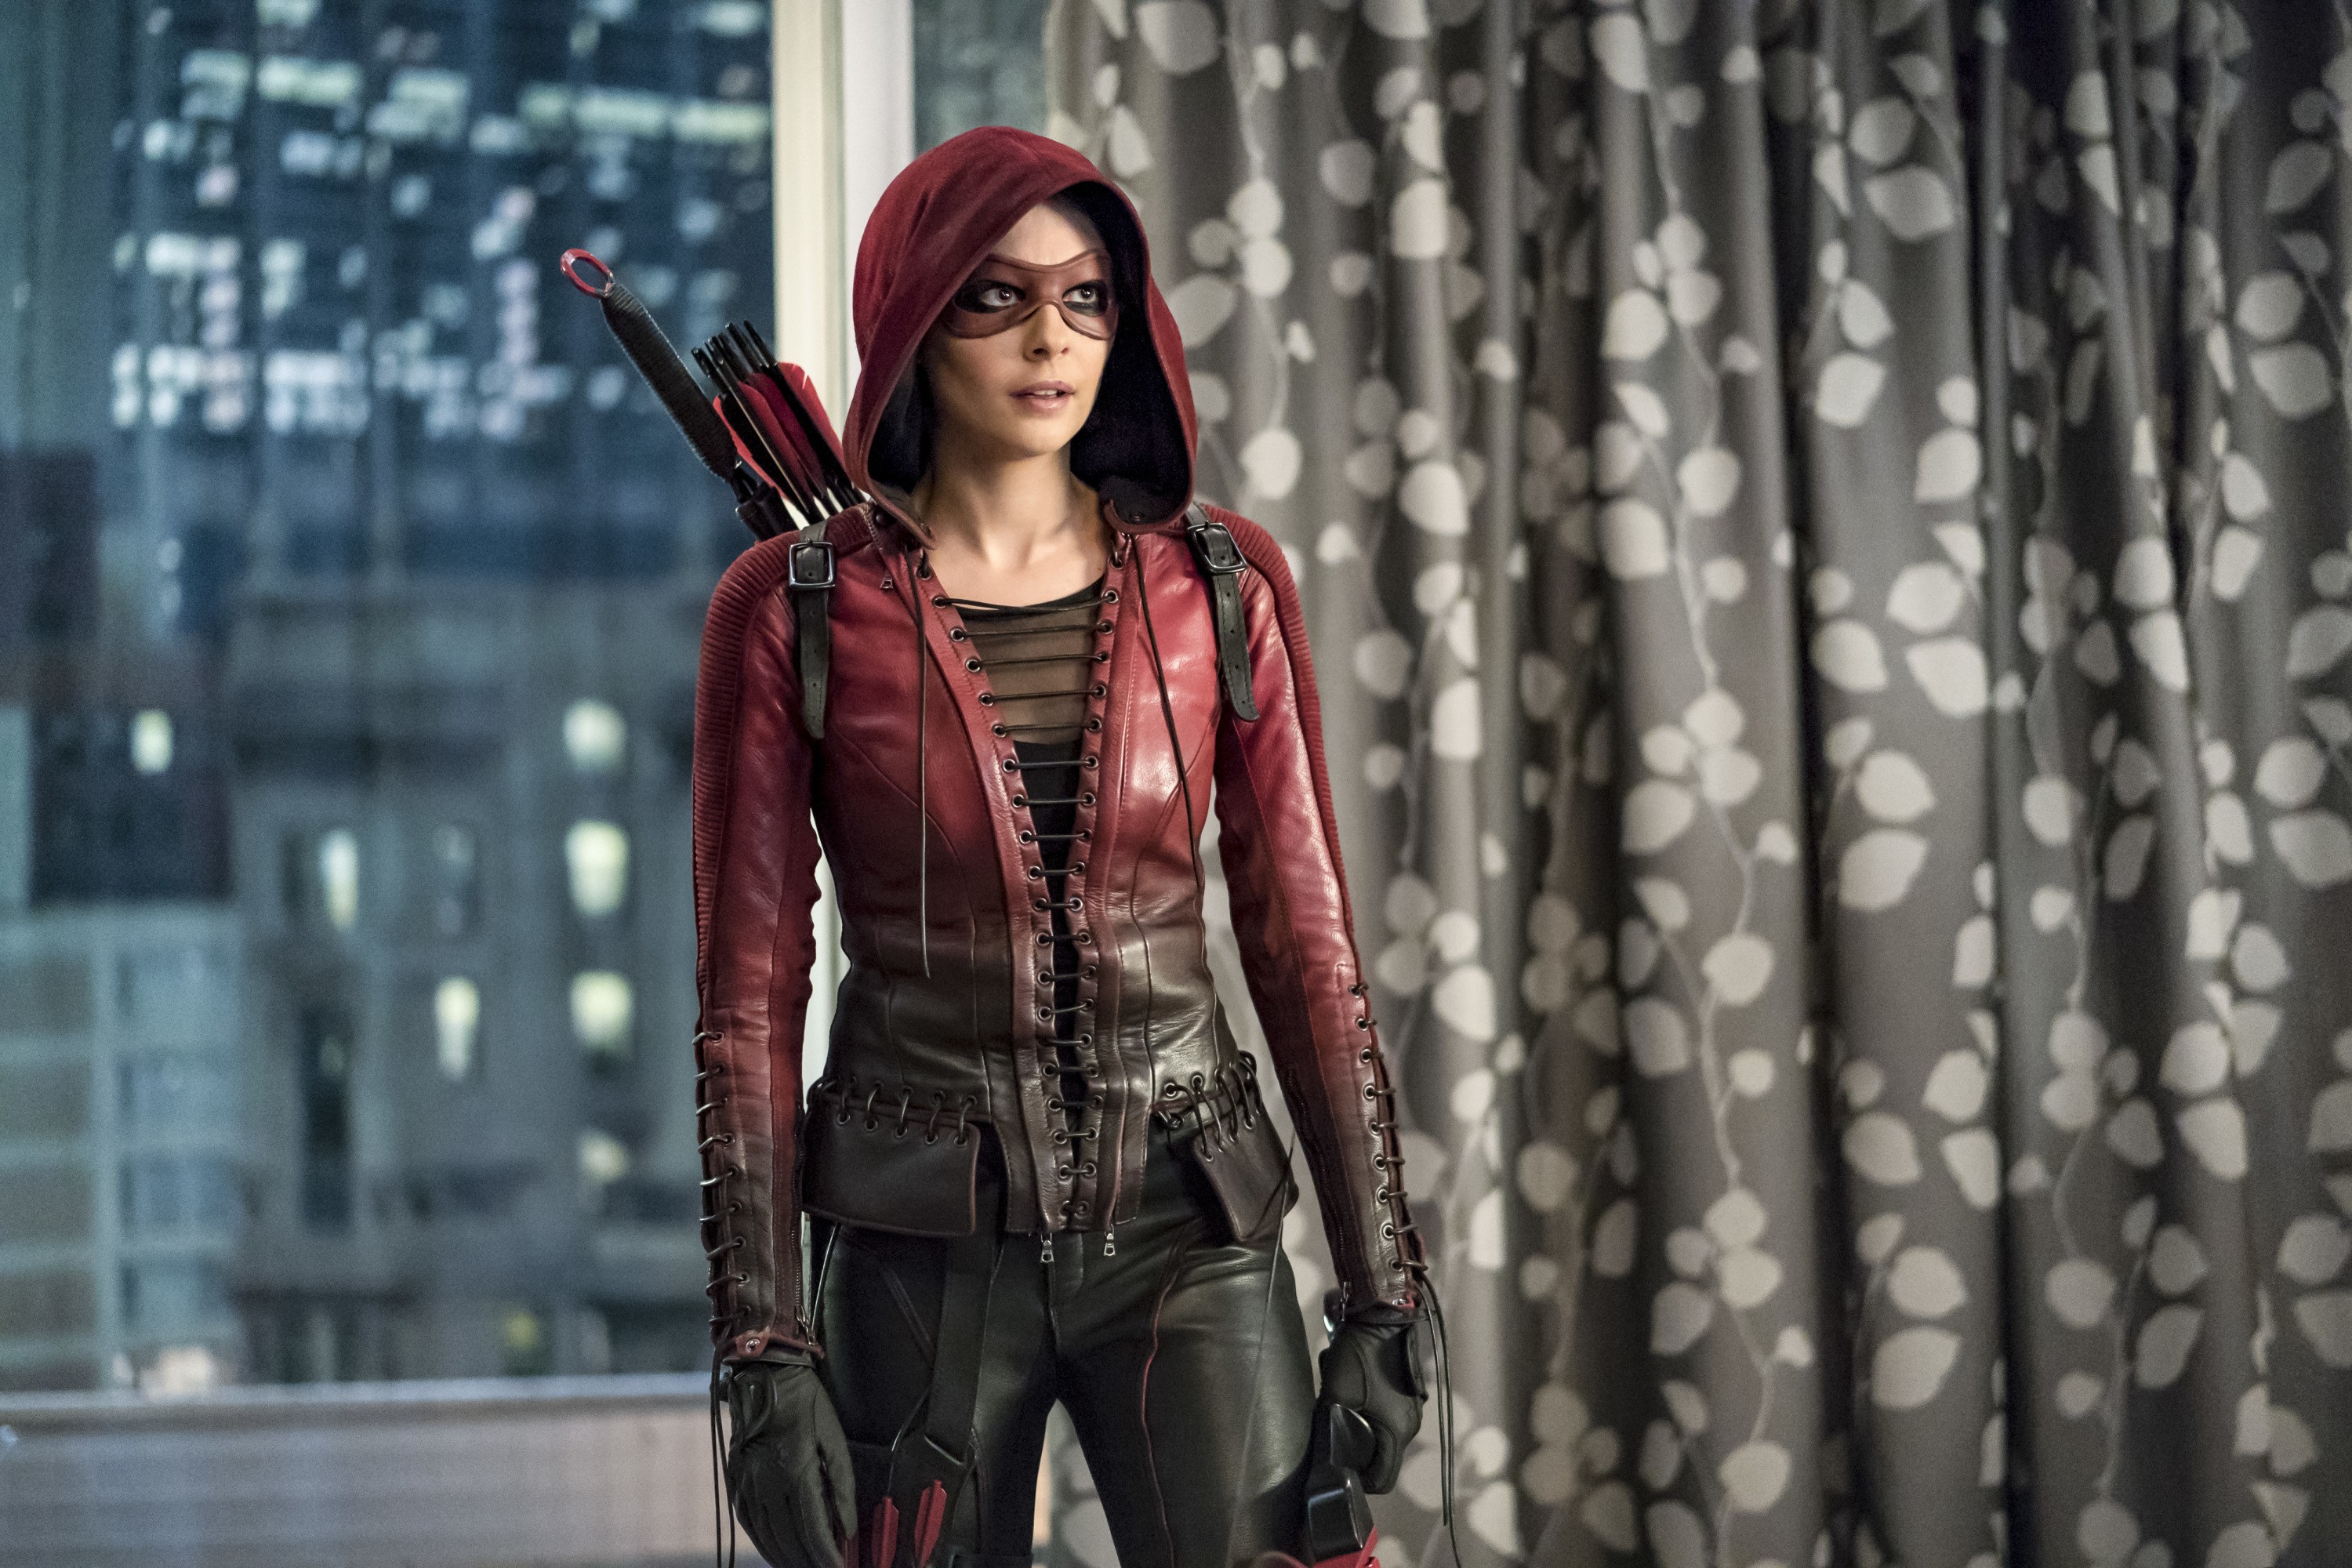 Arrow Speedy Suits Up Again To Save Roy Harper In New